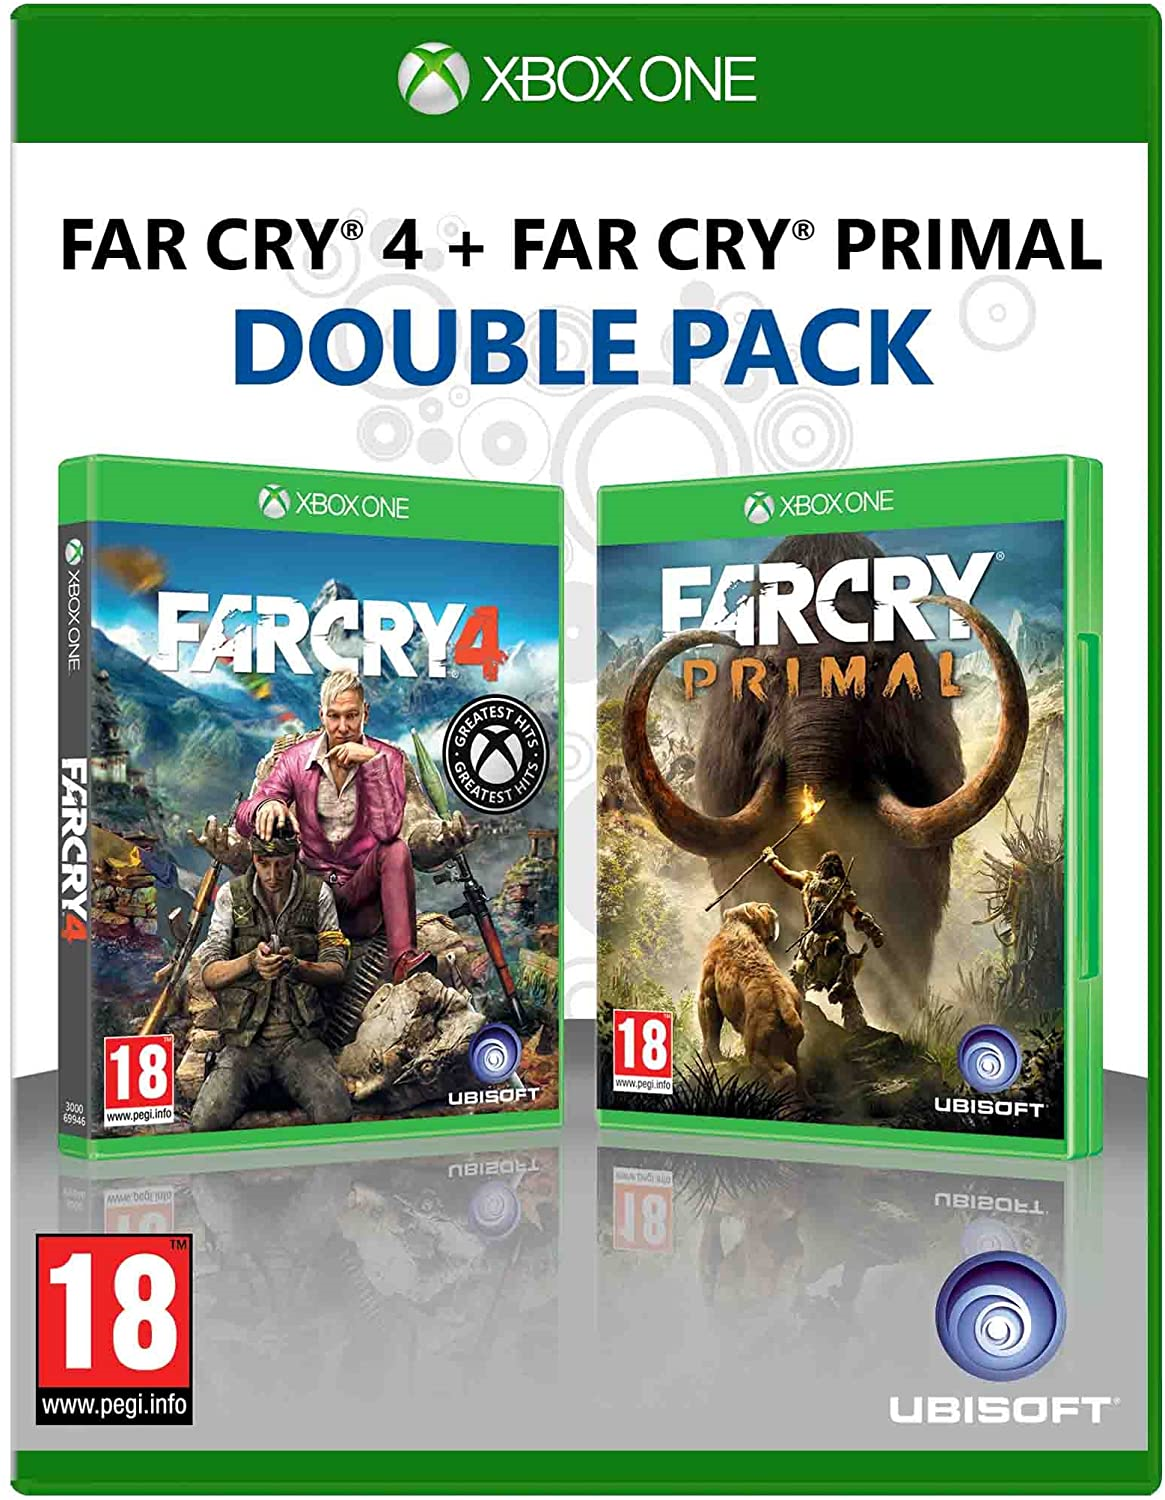 FARCRY 4+FARCRY PRIMINAL (DOUBLE PACK) -XBOX ONE - saynama